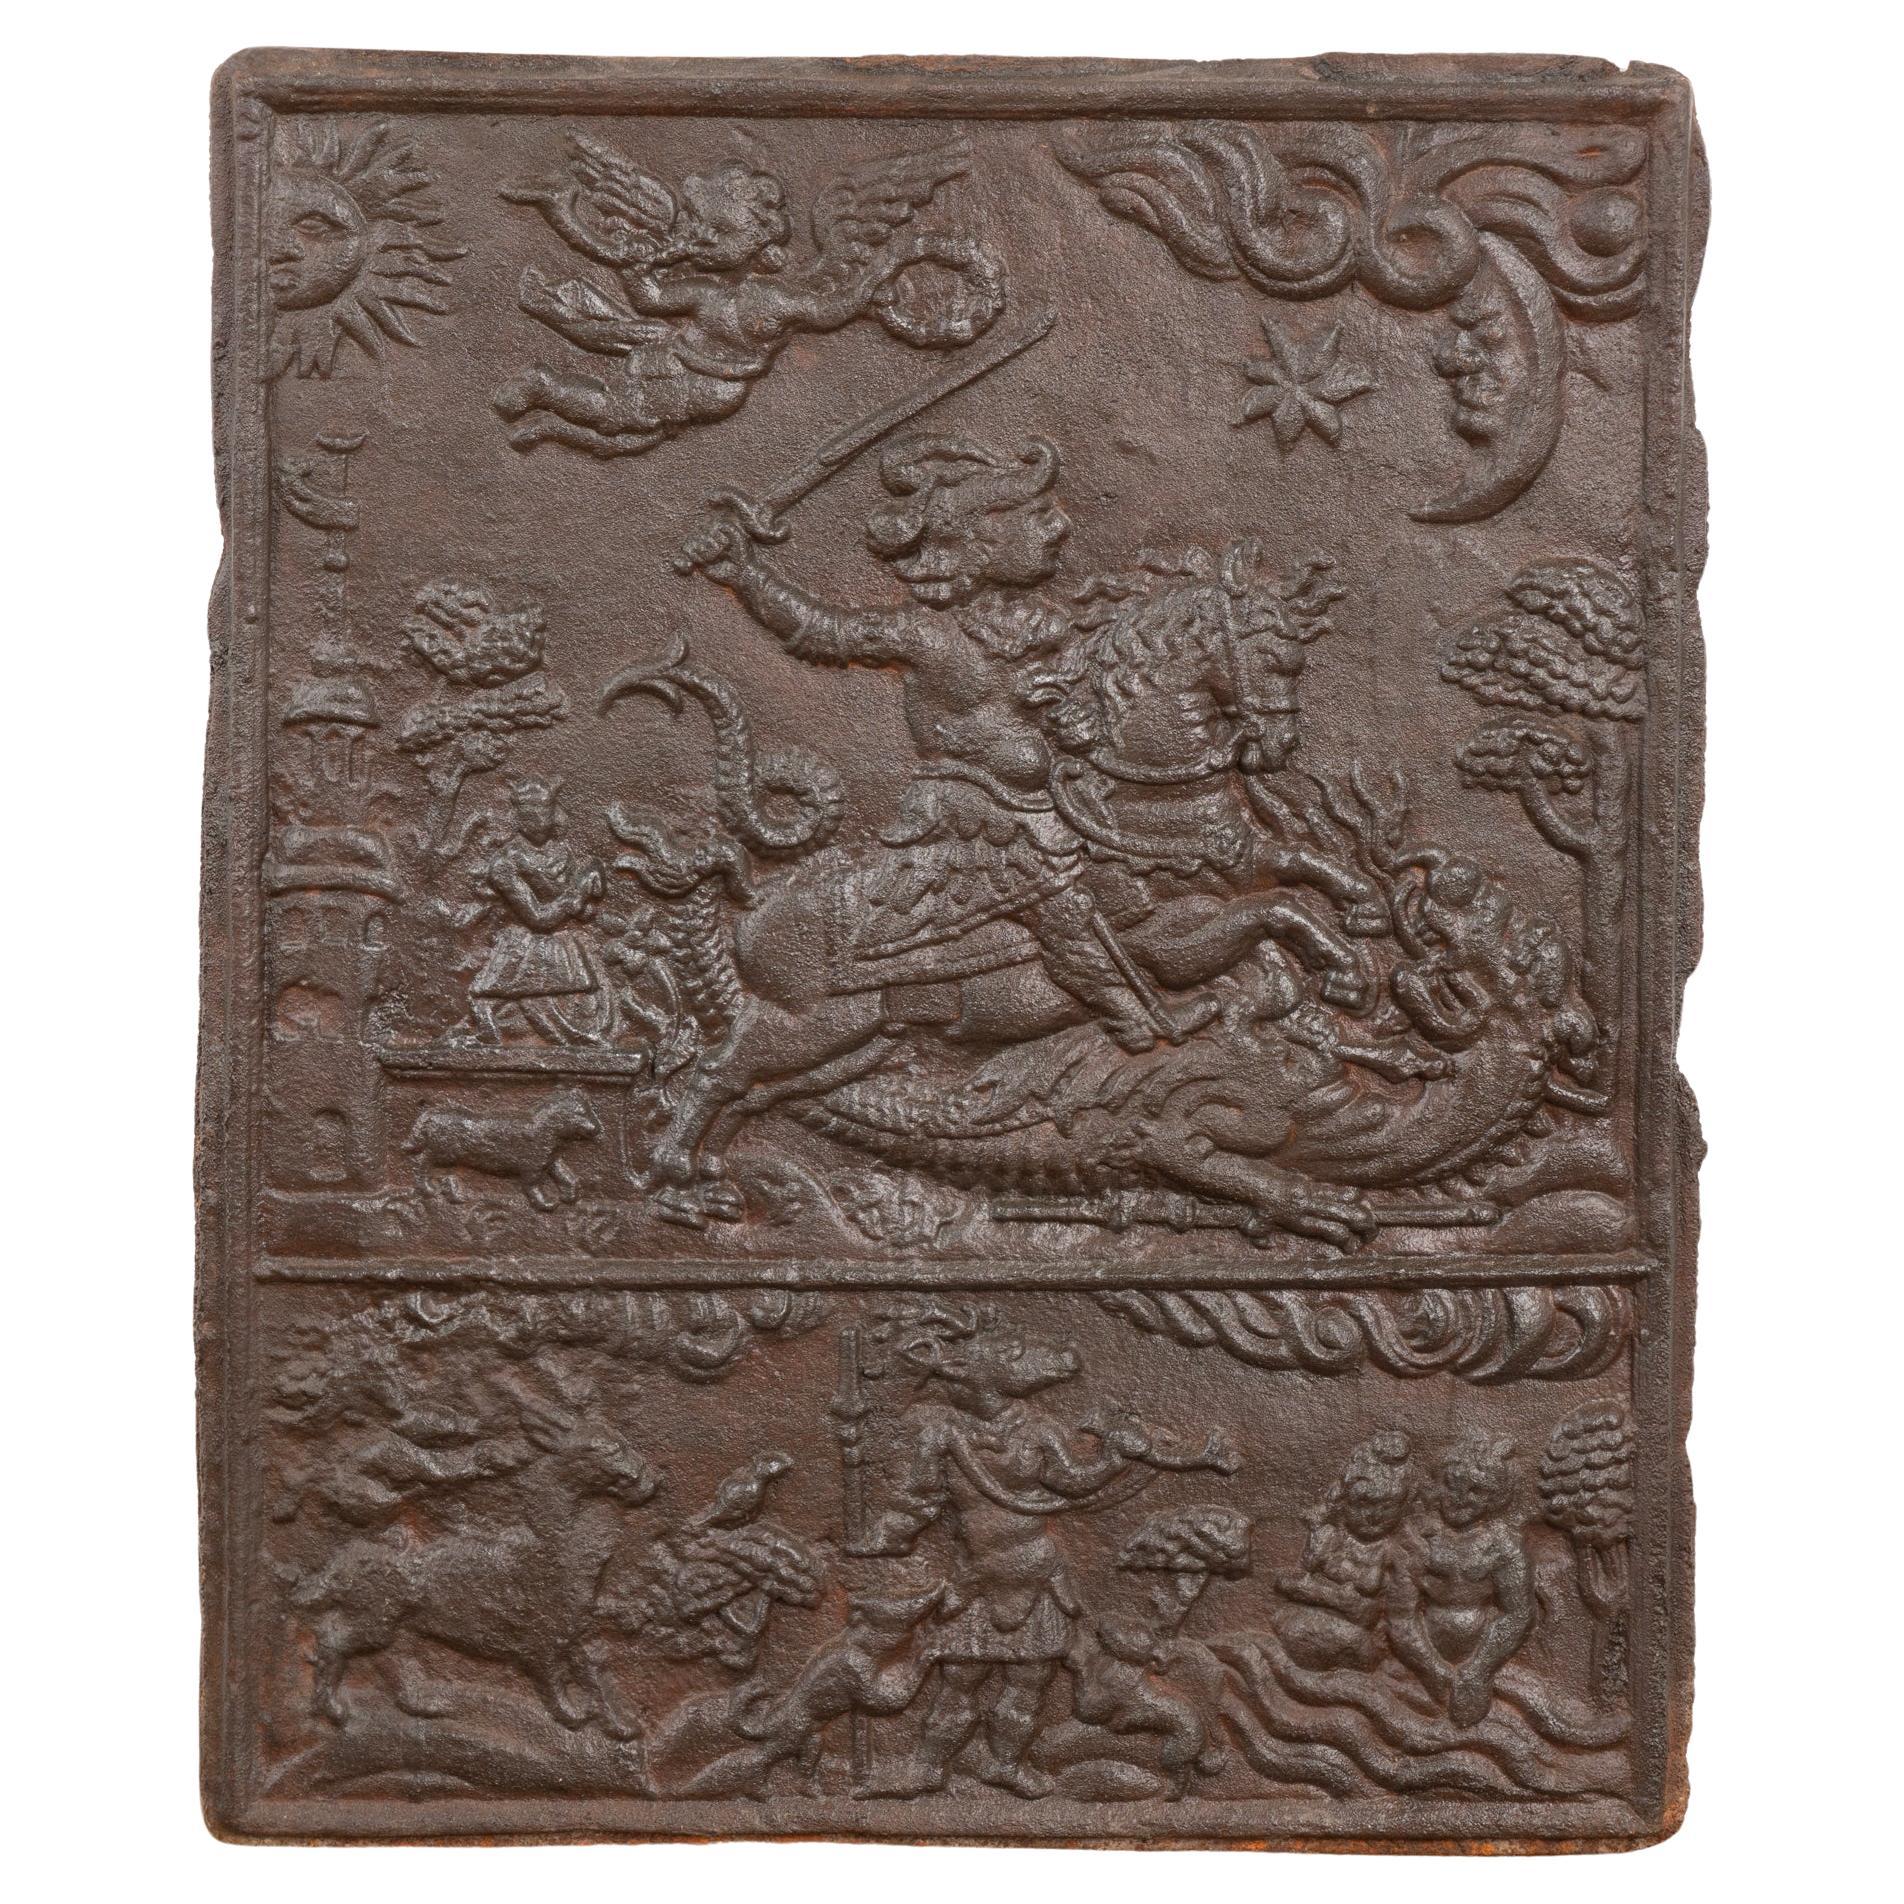 Cast Iron Fire Back With Soldier on Horseback, Sweden Circa 1760-1800